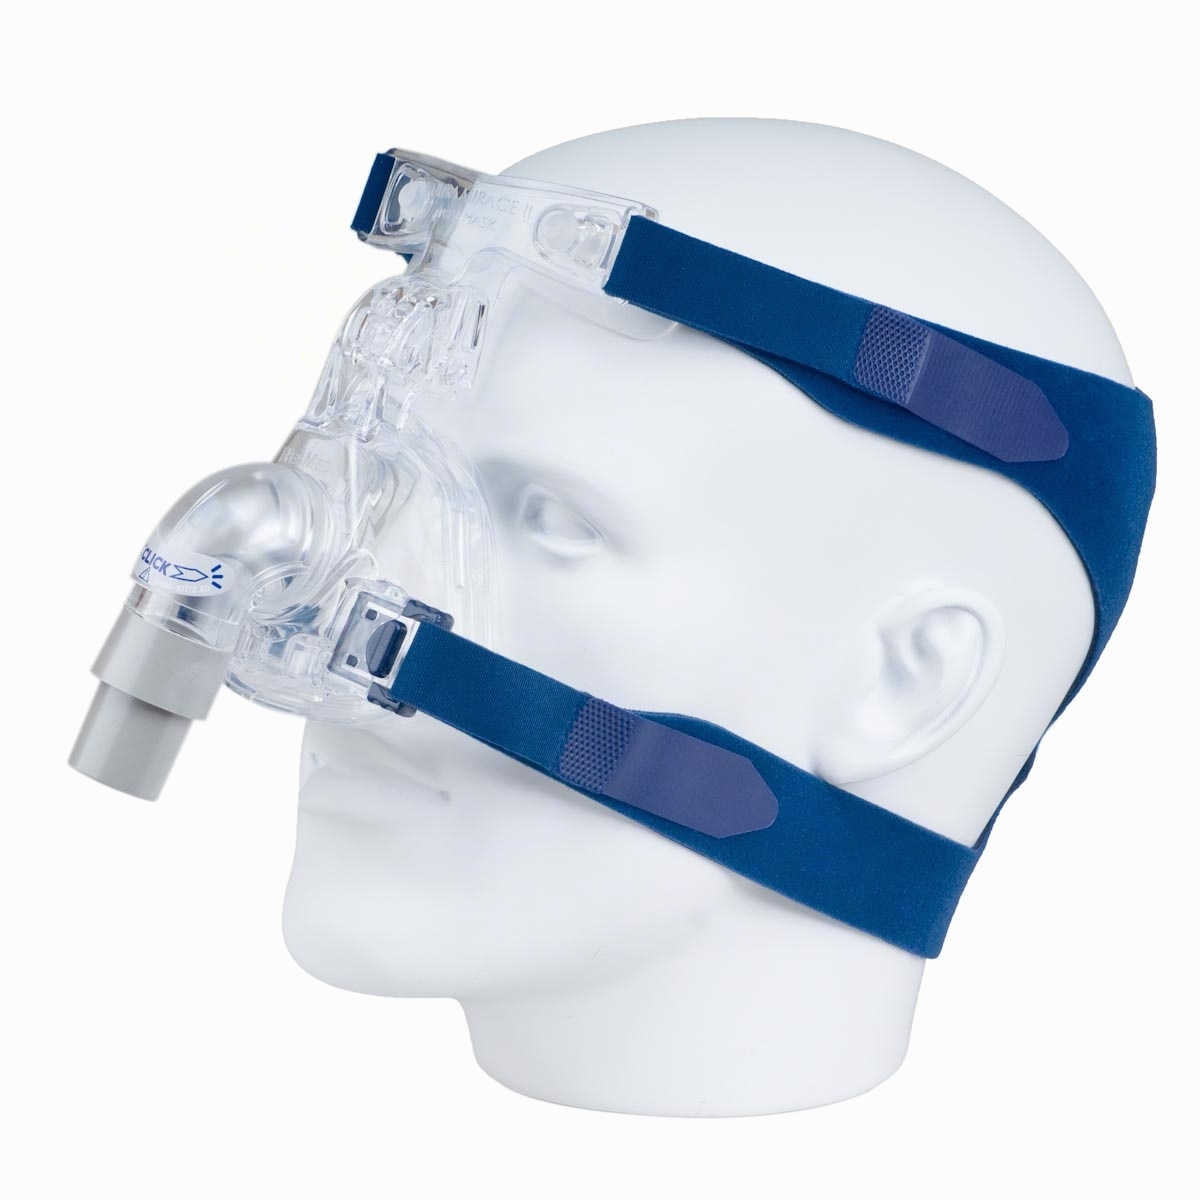 ResMed Ultra Mirage II Nasal Complete System with Headgear